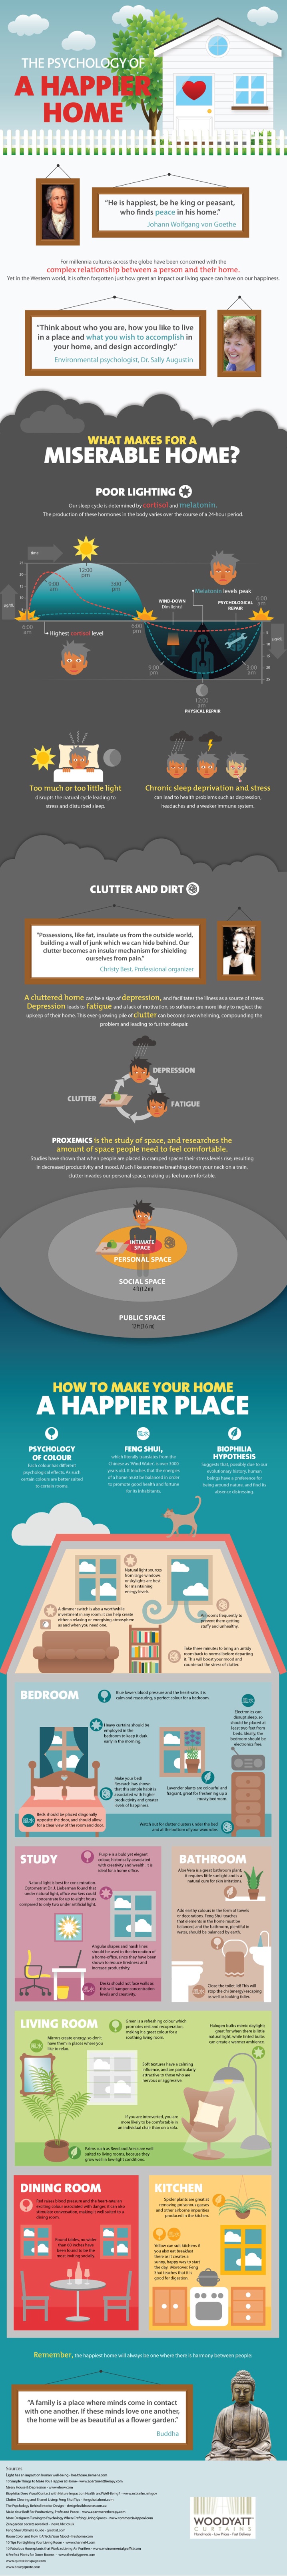 The Psychology of a Happier Home